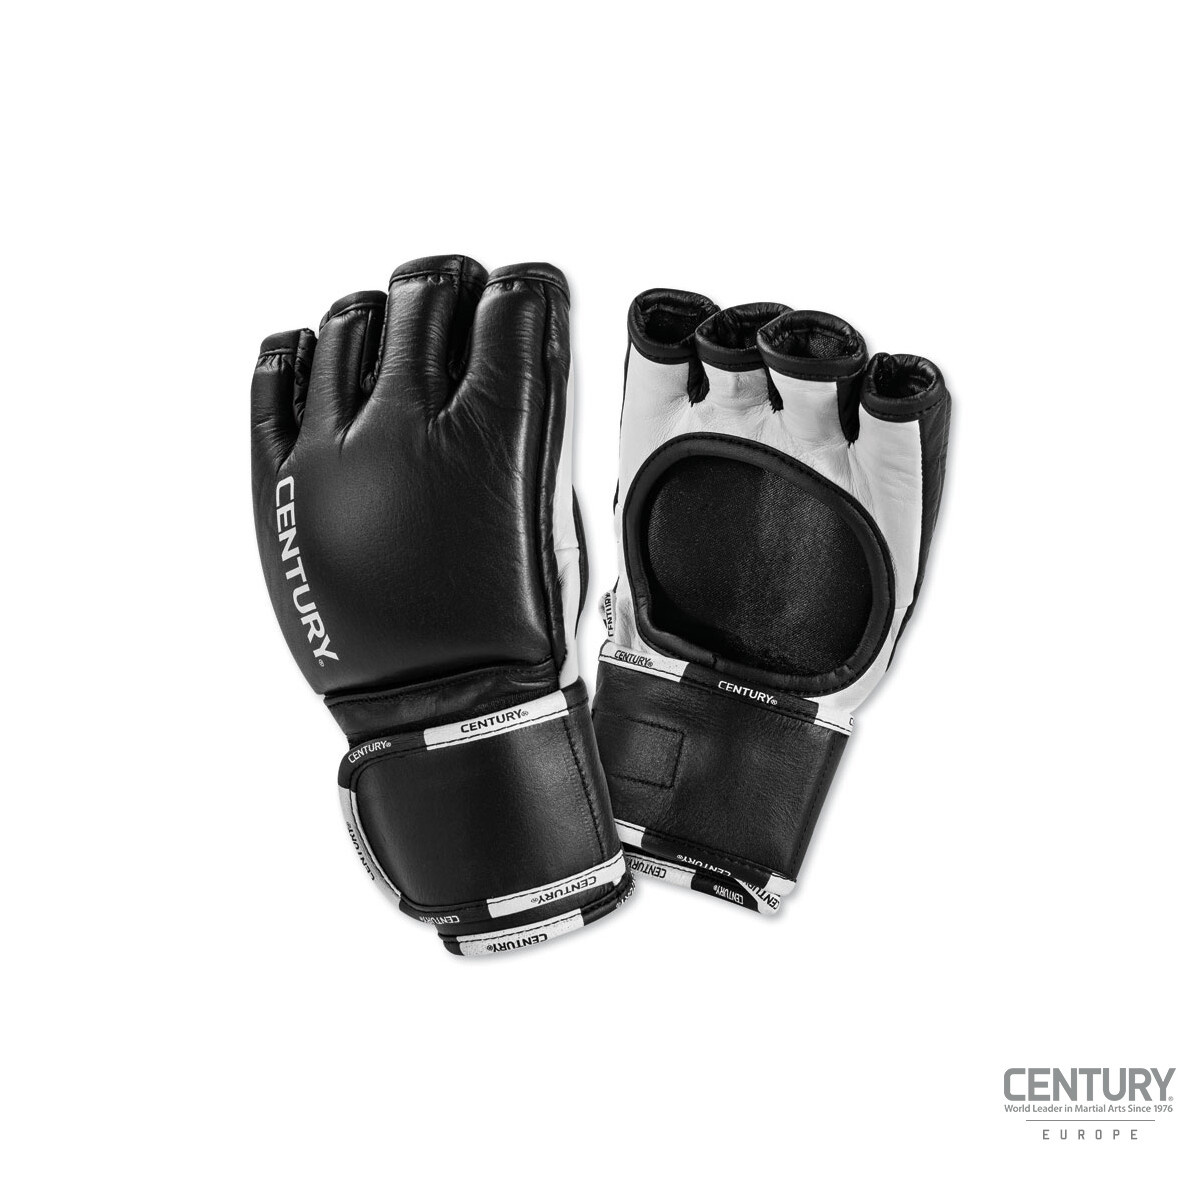 Century "Creed" MMA Competition Gloves M